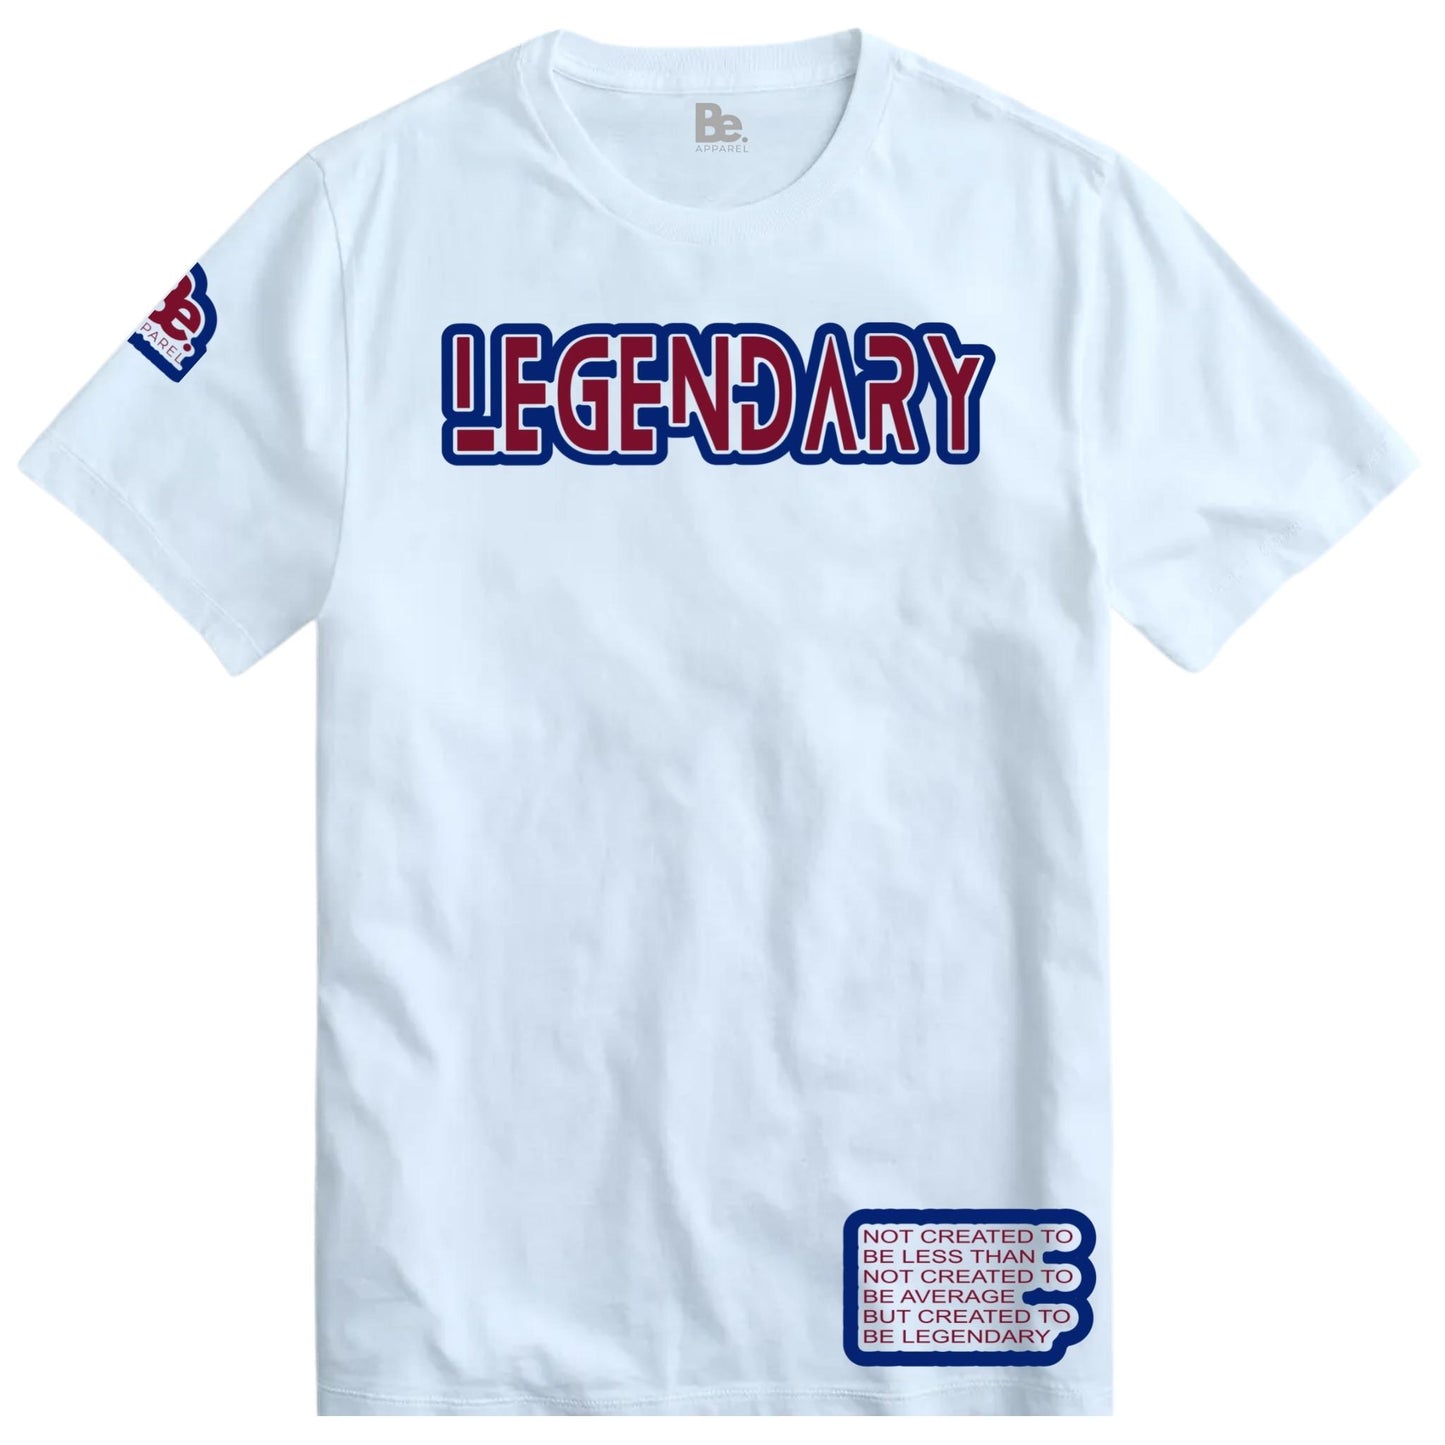 LEGENDARY MANTRA TEE - PUFF Print Red & Navy on White Tee